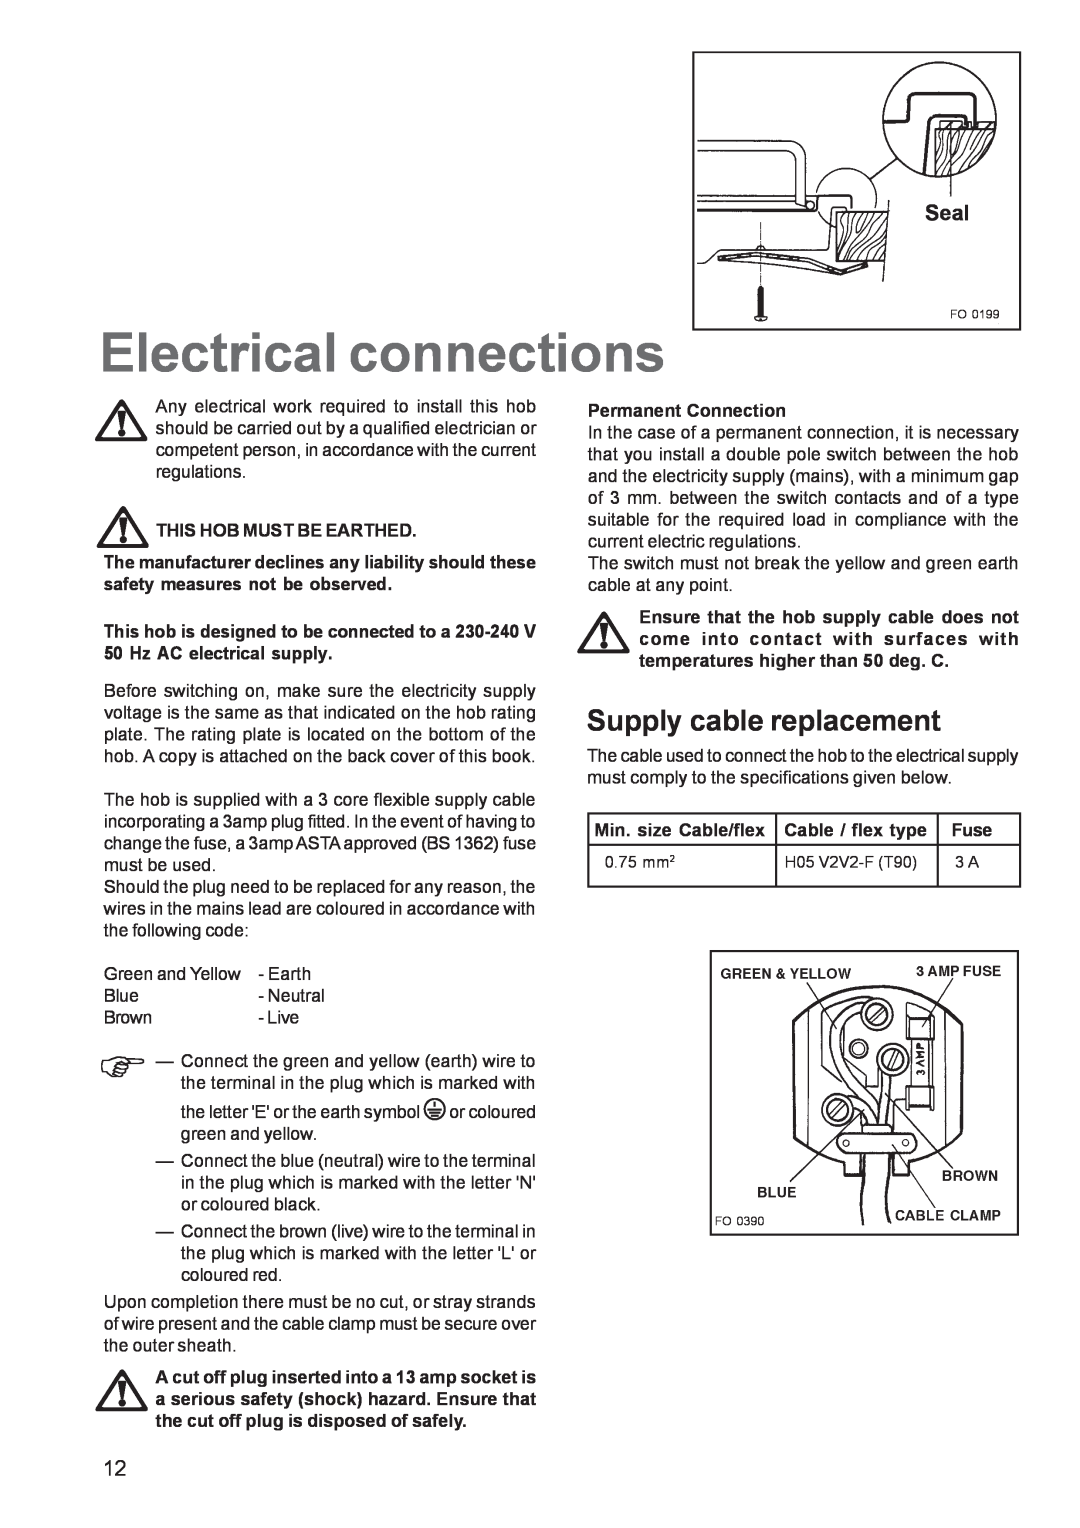 Electrolux EHG 7763 manual Electrical connections, Supply cable replacement, aSeal 